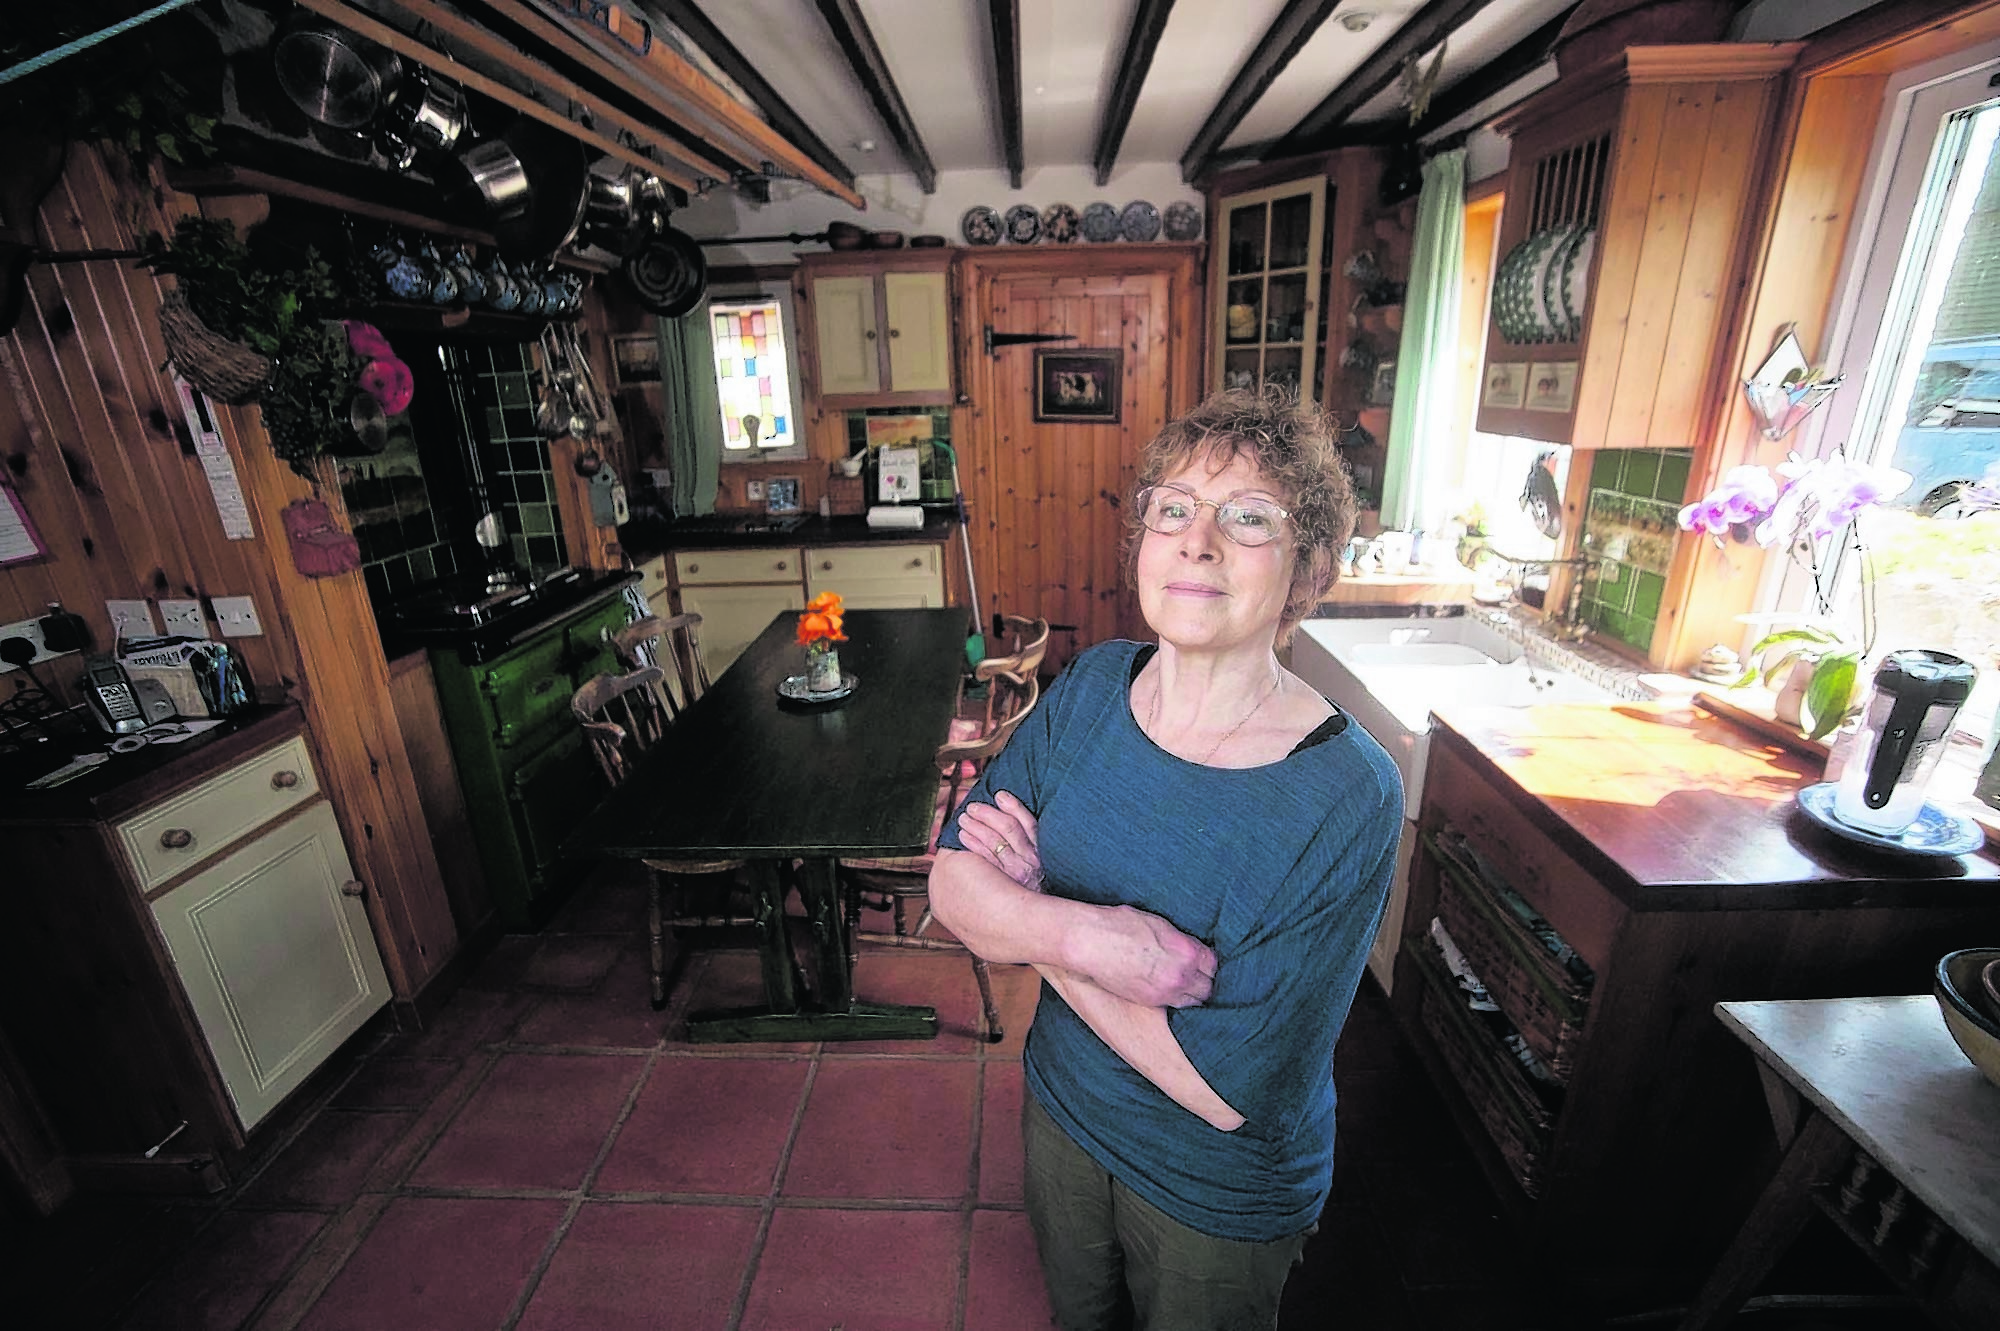  Jane Lannagan at her home, Stronavaich, Tomintoul Moray.  Photo by Michael Traill 9 South Road Rhynie Huntly AB54 4GA Contact numbers Mob07739 38 4792 Home01464 861425